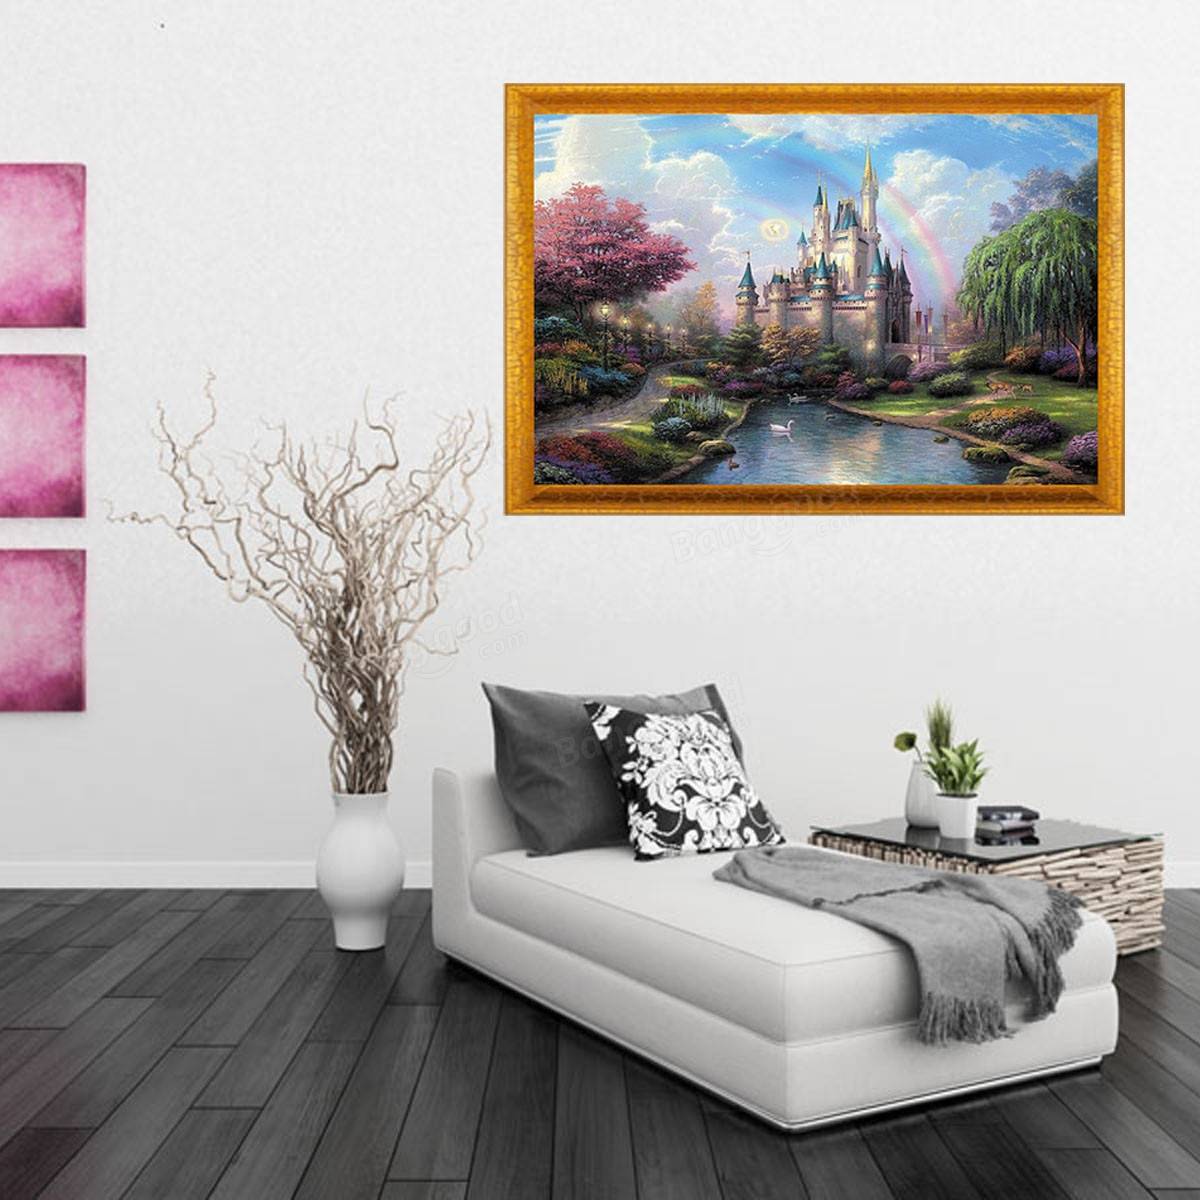 Digital Oil Painting Castle DIY Oil Painting By Numbers Kits Tower Frameless Canvas Home Wall Decor 40x50cm